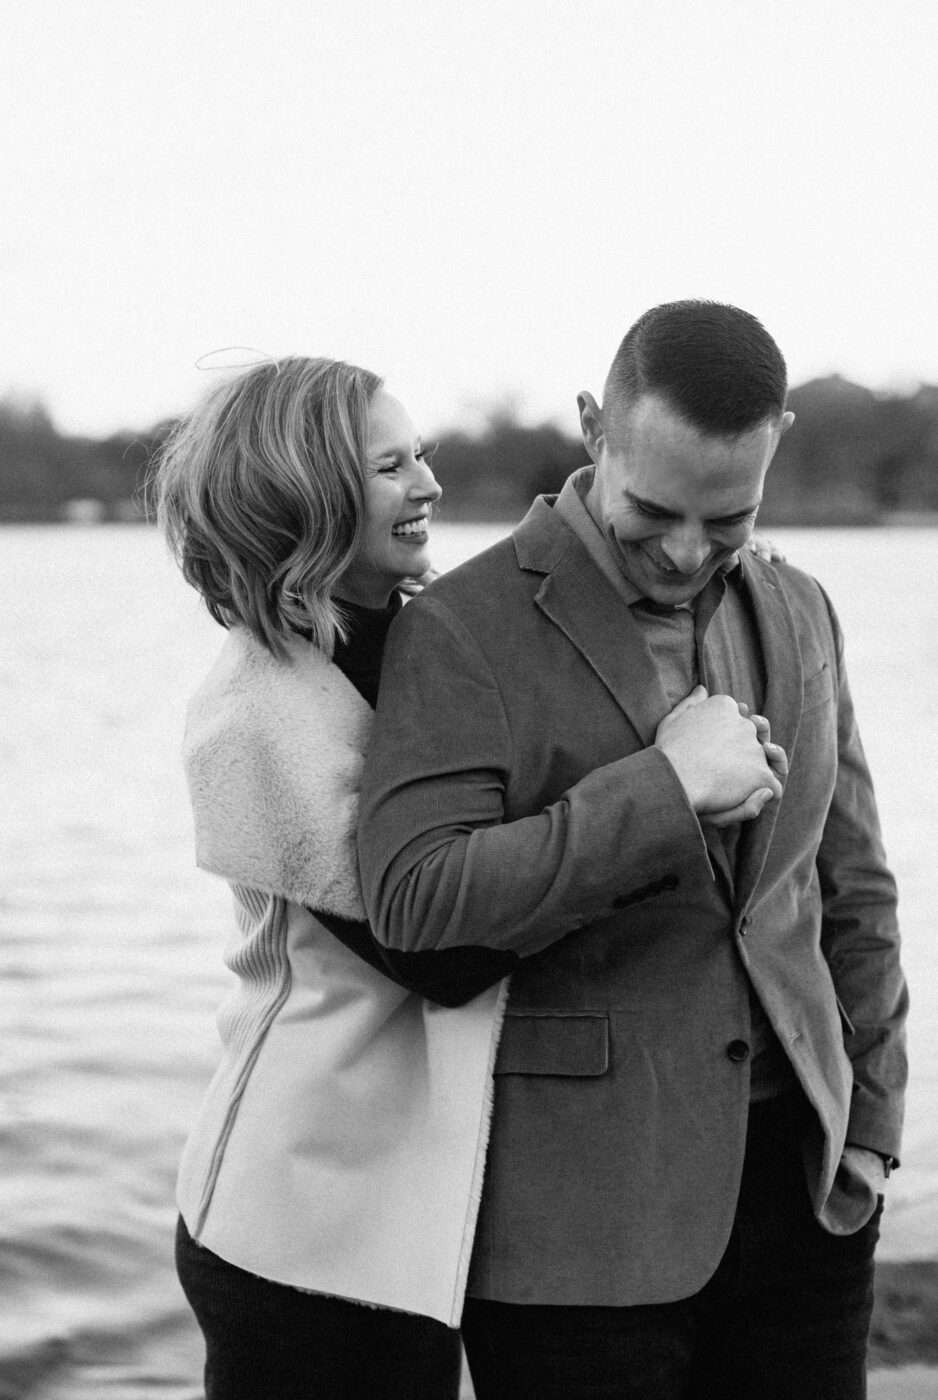 Black and white photo of a young couple smiles and laughs while embracing each other